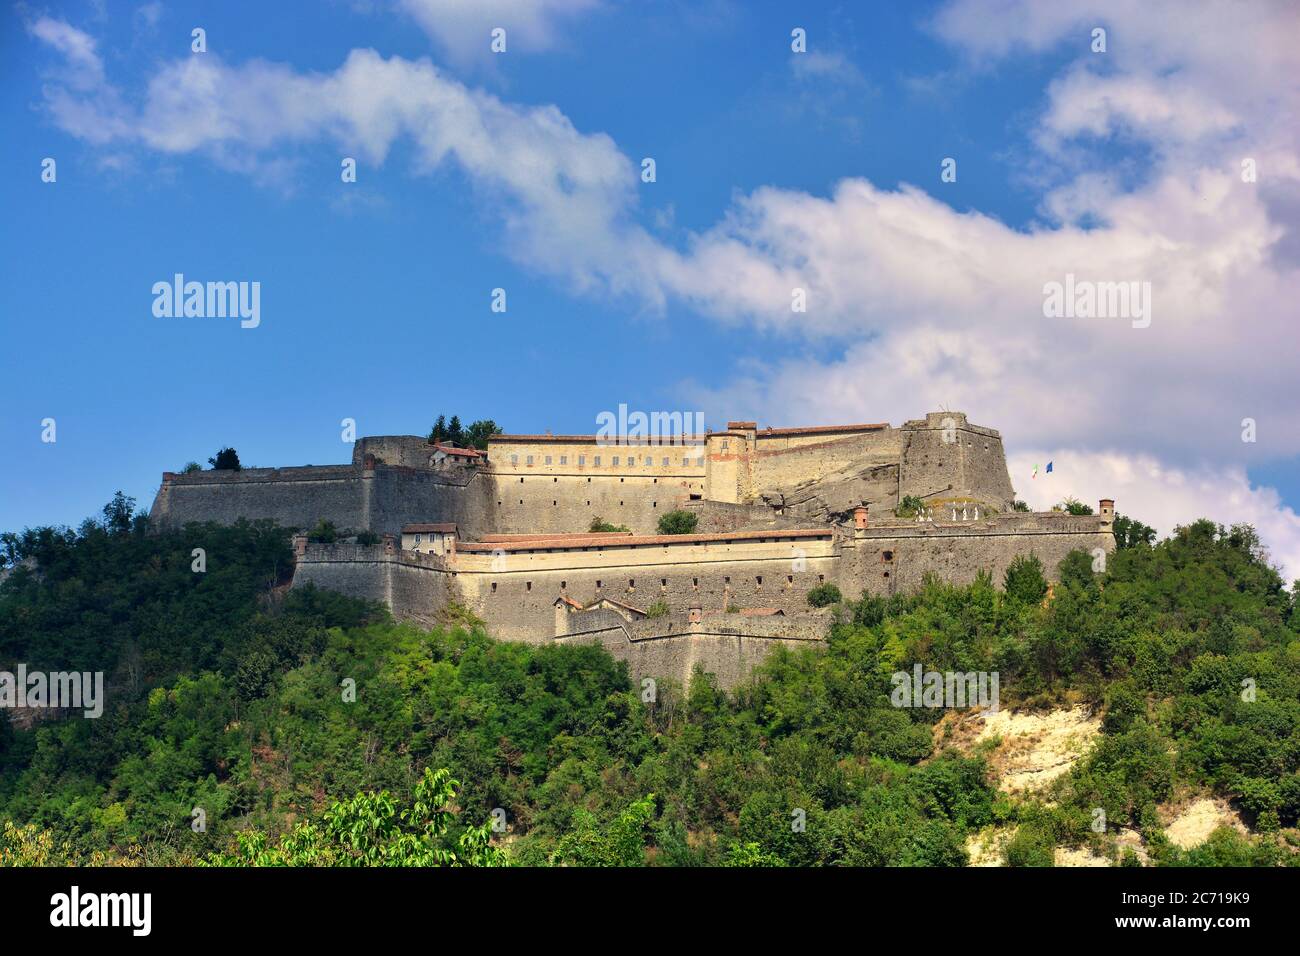 The fort of Gavi is a historic fortress built by the Genoese and stands on a rocky outcrop overlooking the ancient village of Gavi,Alessandria. Stock Photo